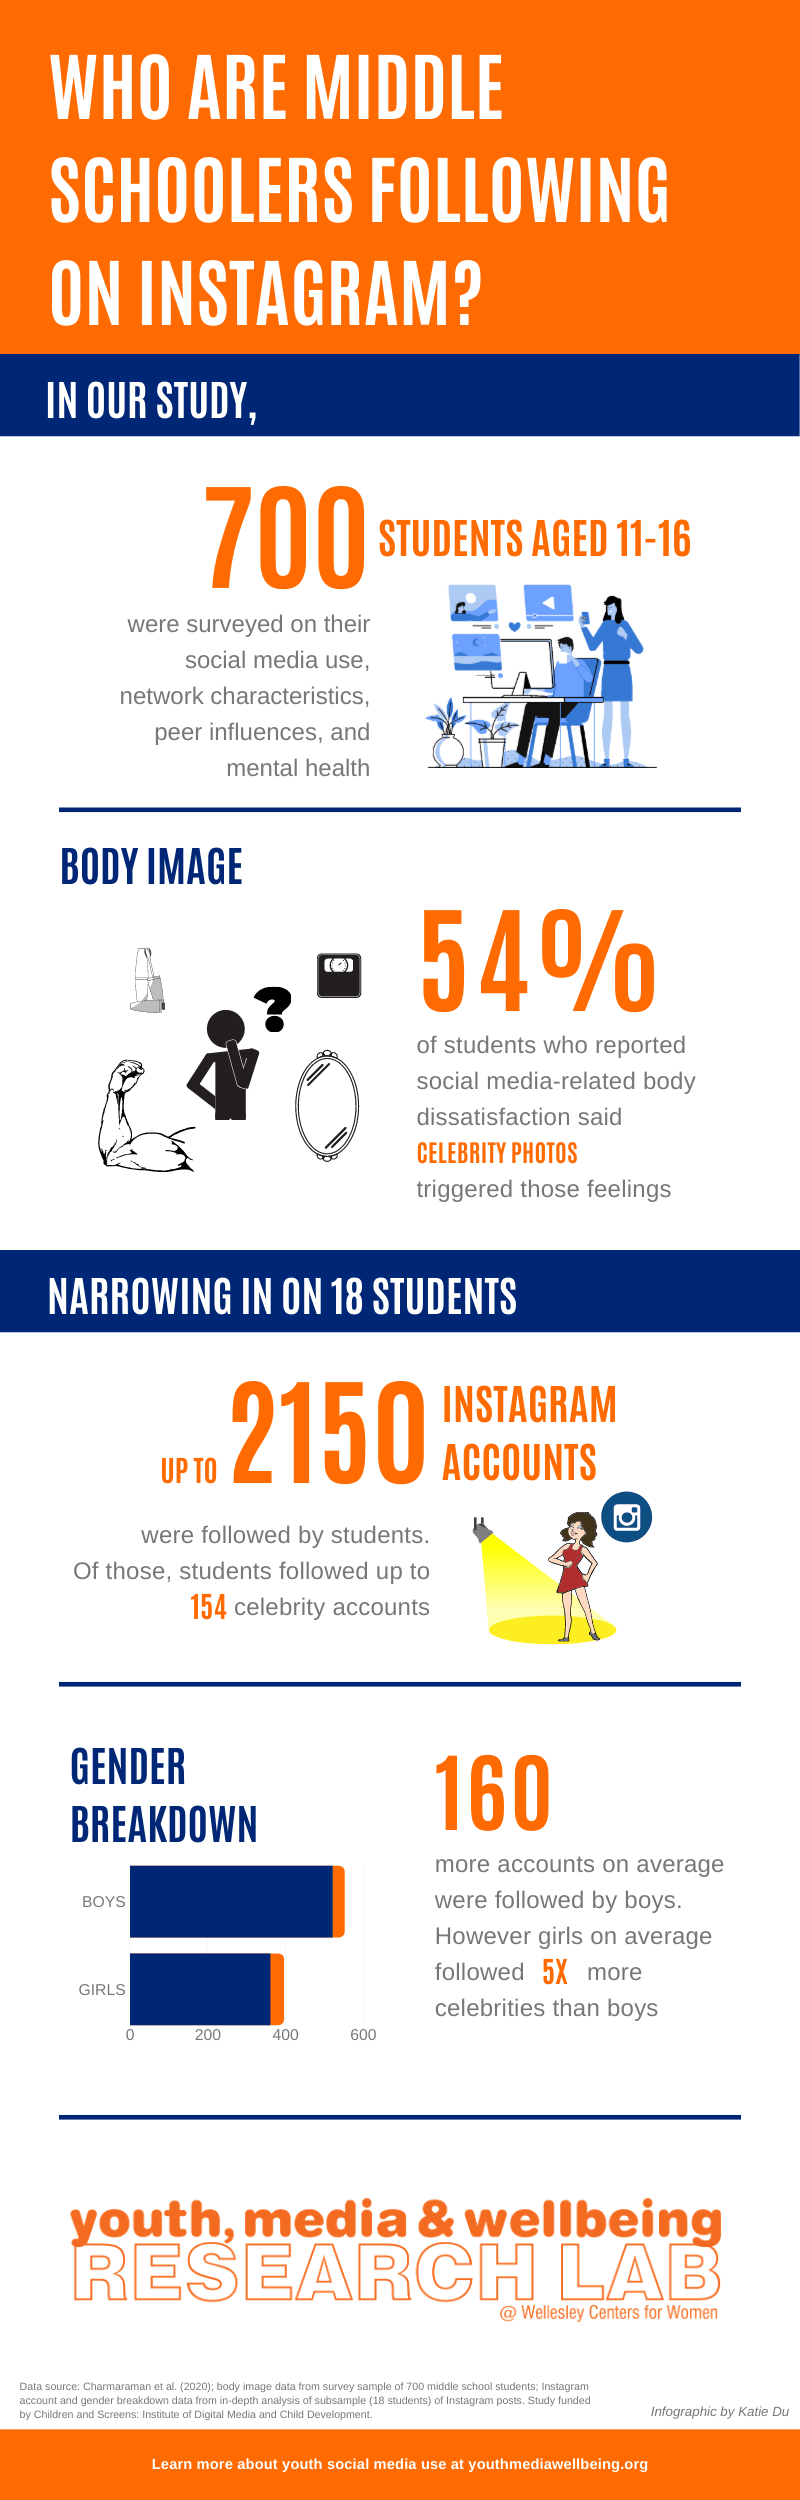 Infographic with information about middle schoolers' social media use and body image issues